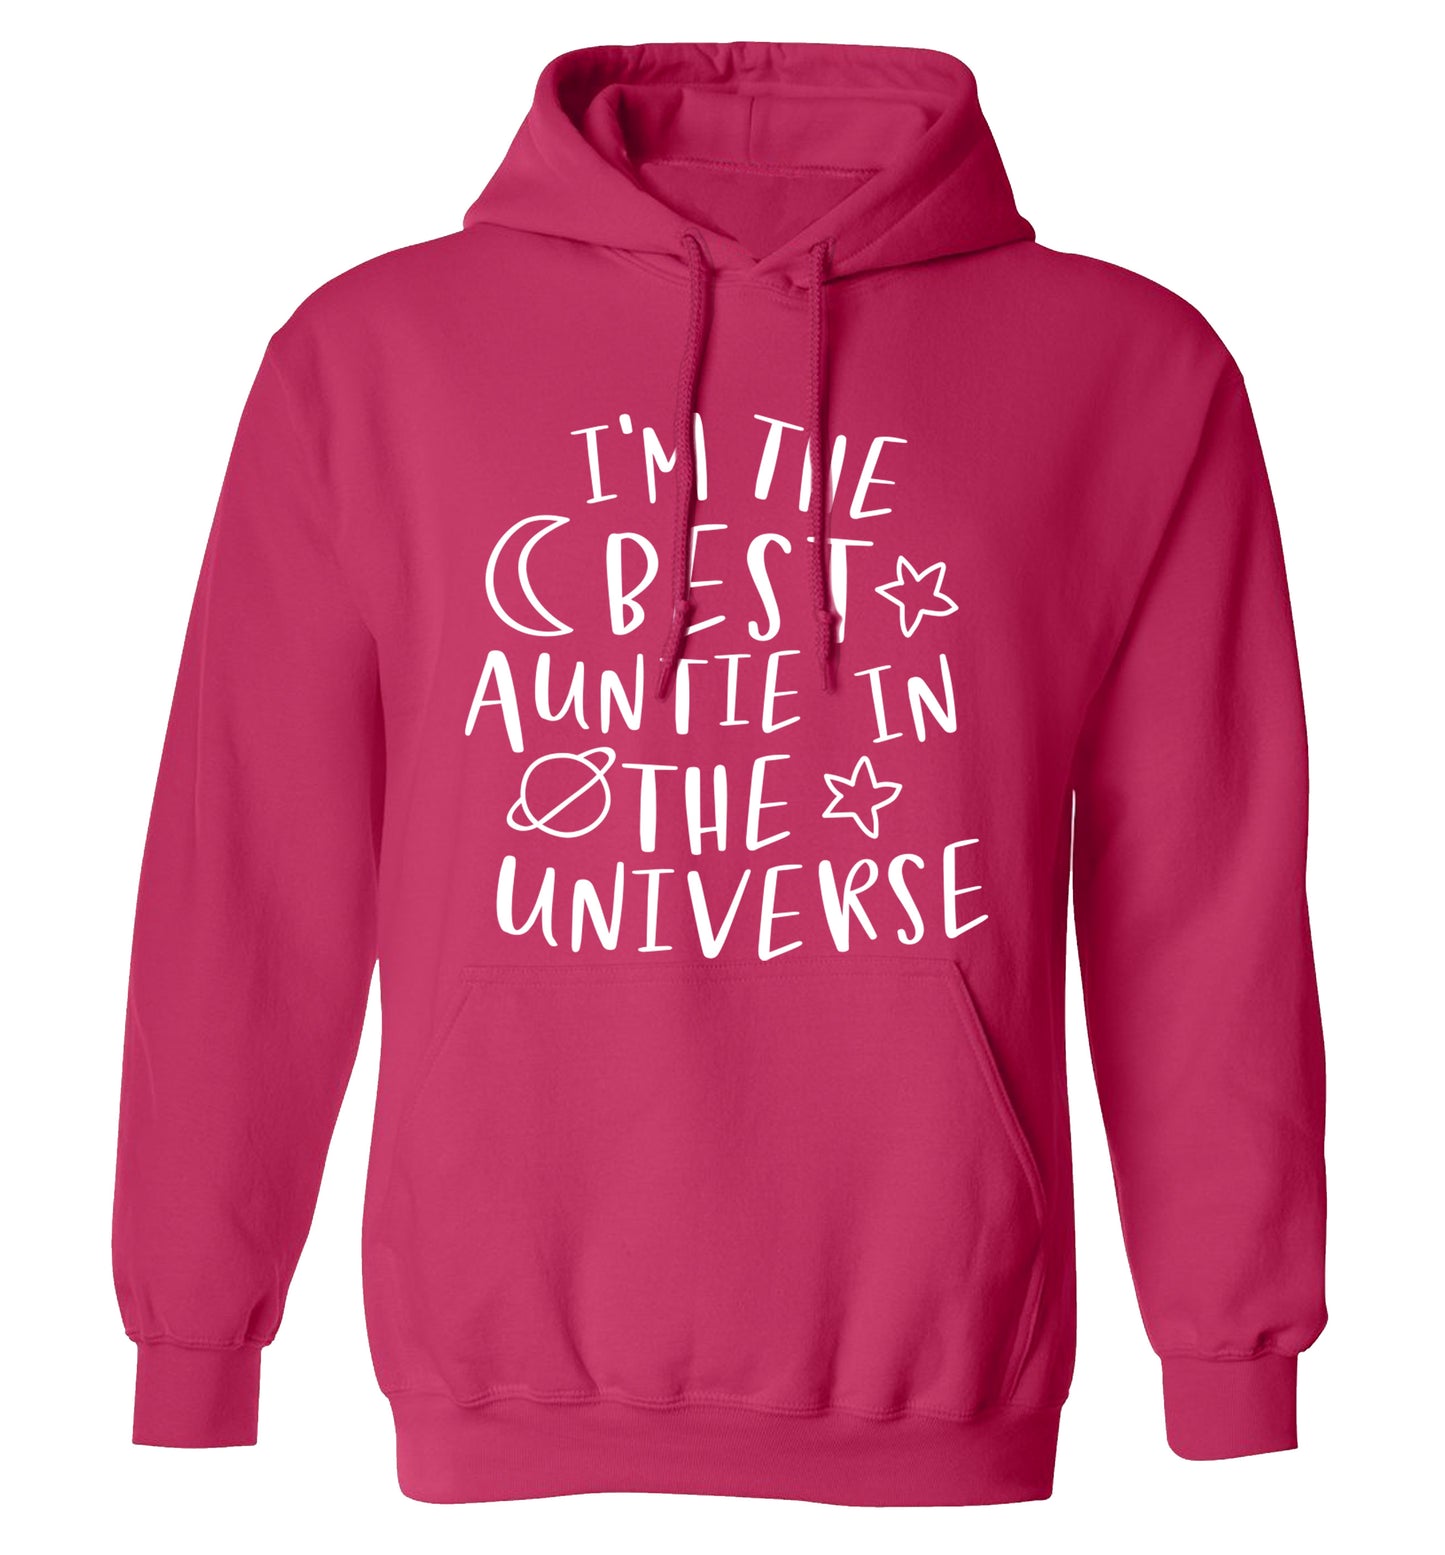 I'm the best auntie in the universe adults unisex pink hoodie 2XL